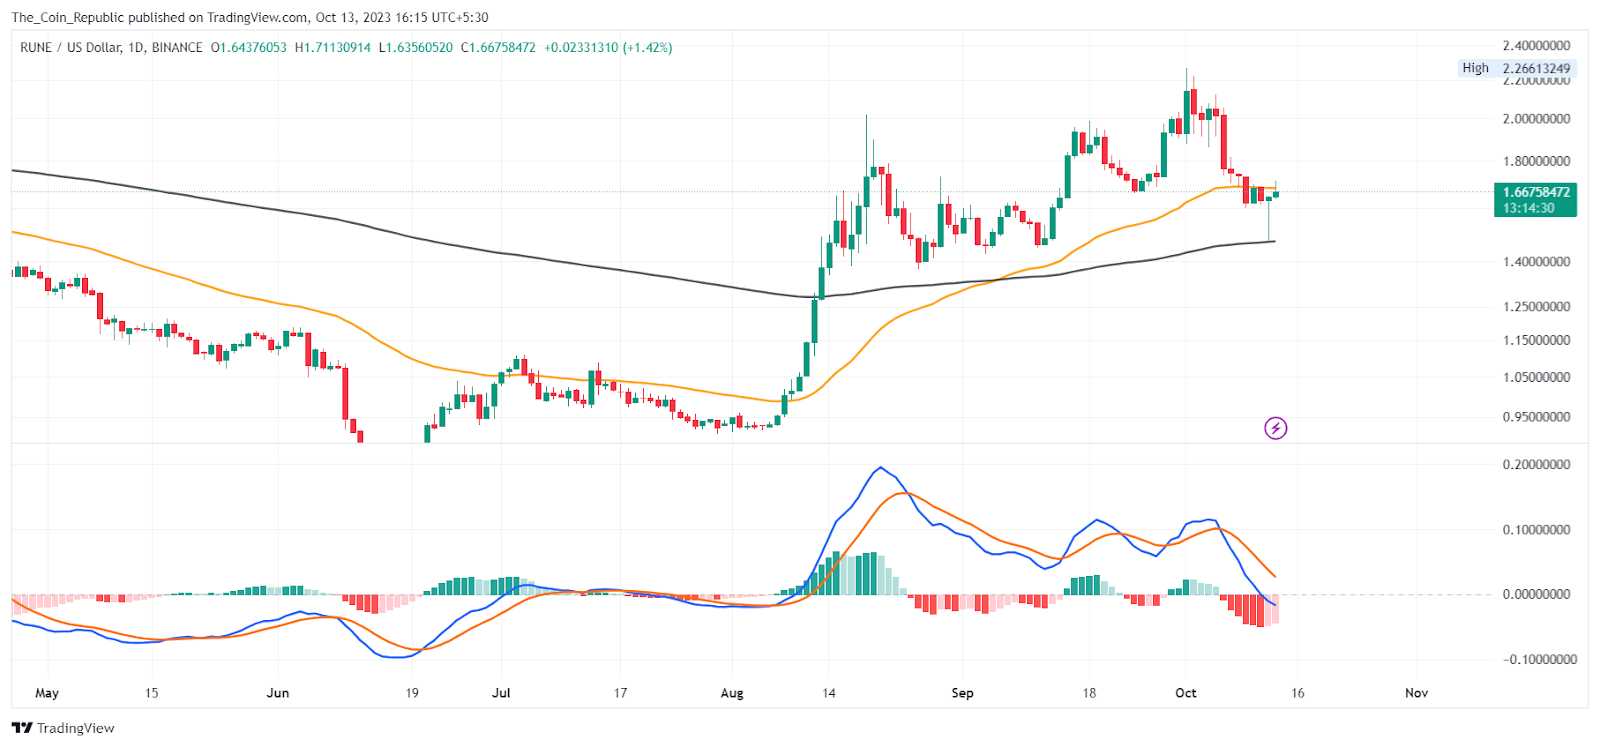 THORChain Price Surges Over 10%: Will The Bullish Rally Continue?